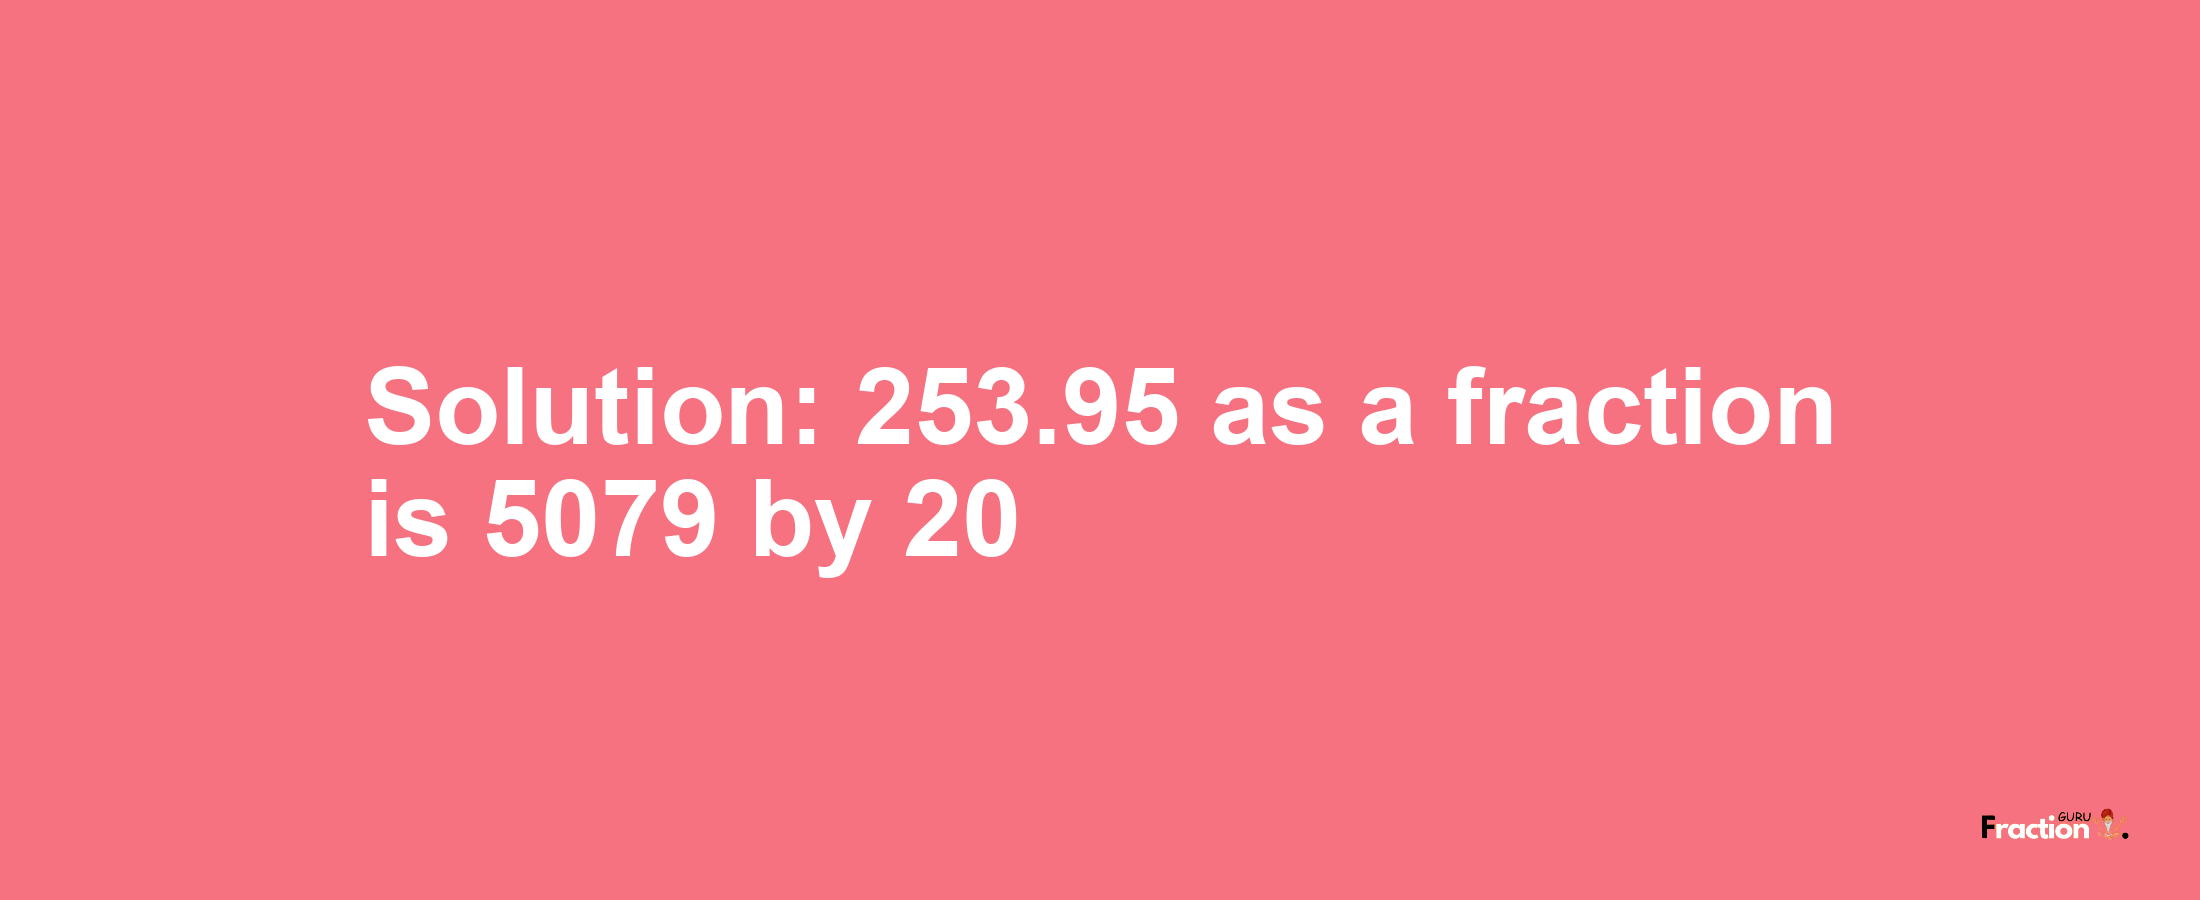 Solution:253.95 as a fraction is 5079/20